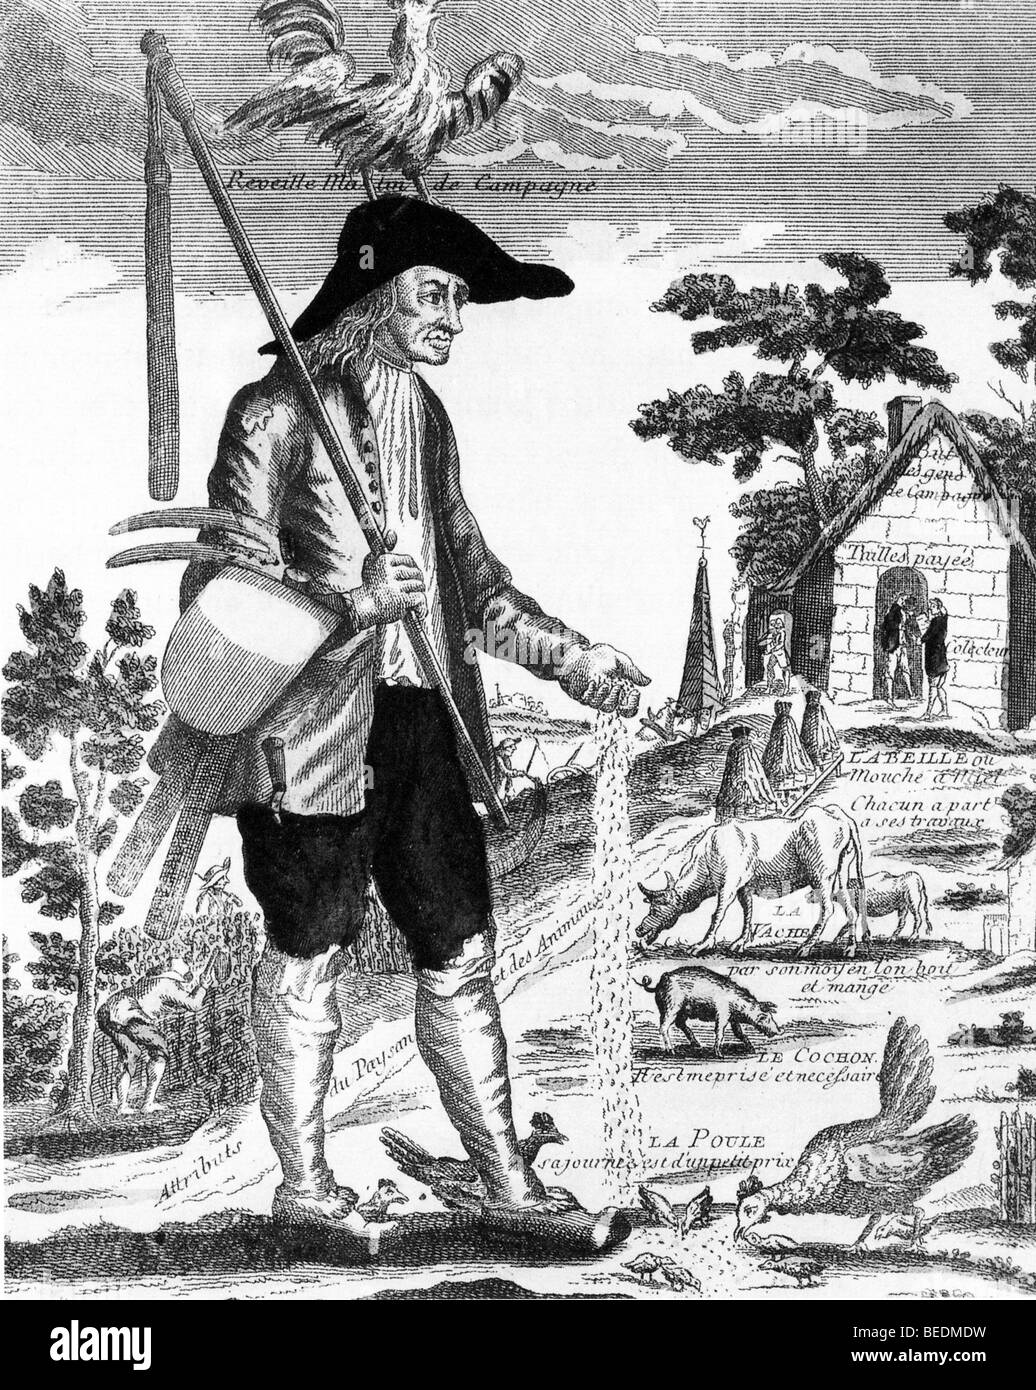 FRENCH PEASANT - 18th century cartoon illustrates the poor living and working conditions of farmers - see Description below Stock Photo